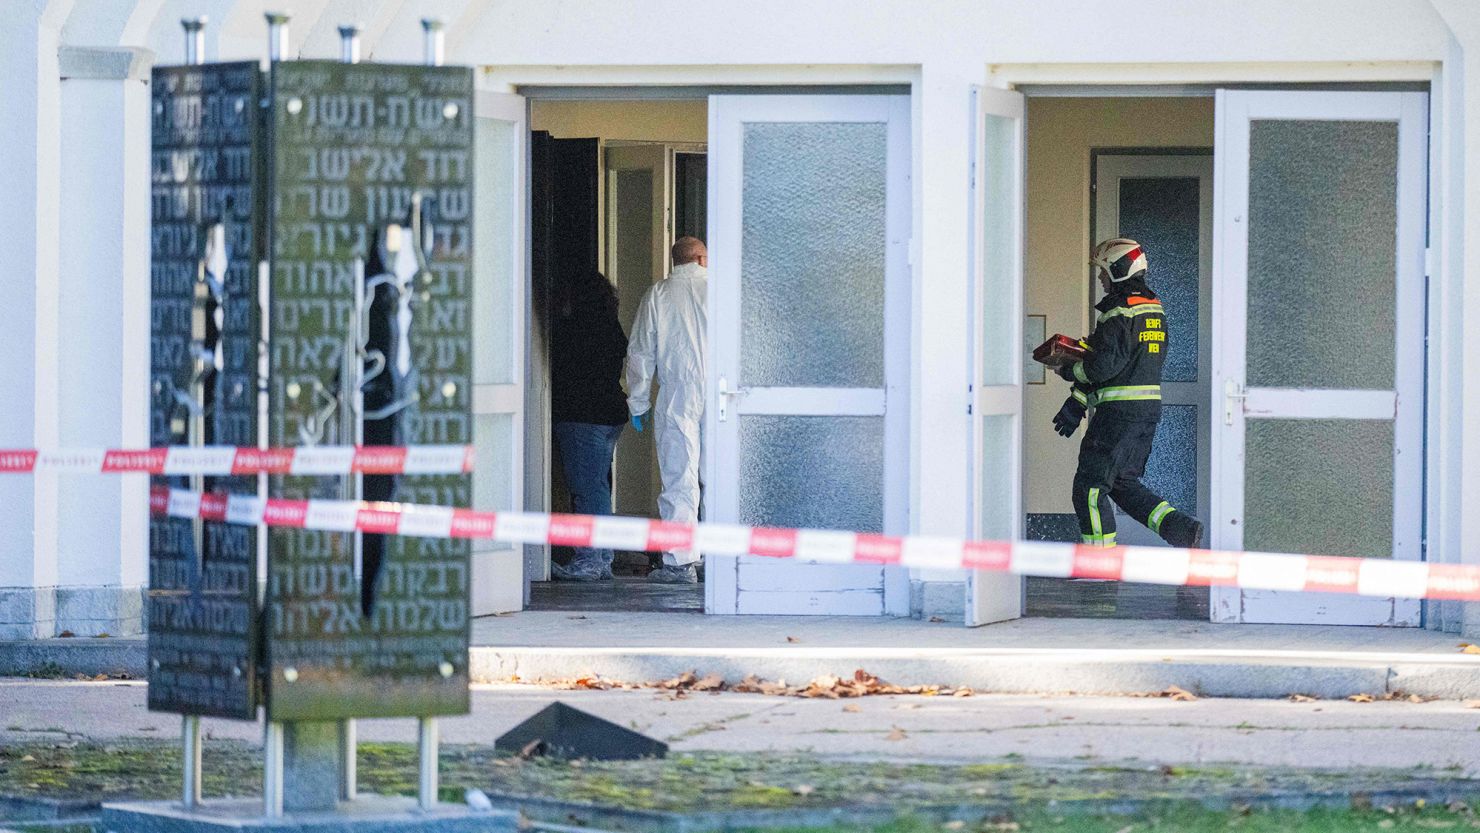 This photo taken on November 1, 2023 shows a firefighter and forensic police at the entrance of the ceremony hall at the Jewish part of the Central Cemetery in Vienna, Austria, after a fire damaged the hall. Austrian police on November 1 were investigating a fire that damaged a hall at the Jewish part of the Vienna cemetery, with politicians condemning anti-Semitic violence. Cities in Europe have seen a spike in anti-Semitic attacks in response to the Israel-Hamas conflict. In the night from October 31 to November 1, a fire broke out at the Jewish part of the Vienna cemetery, damaging a ceremony hall, officers said. (Photo by GEORG HOCHMUTH / APA / AFP) / Austria OUT (Photo by GEORG HOCHMUTH/APA/AFP via Getty Images)